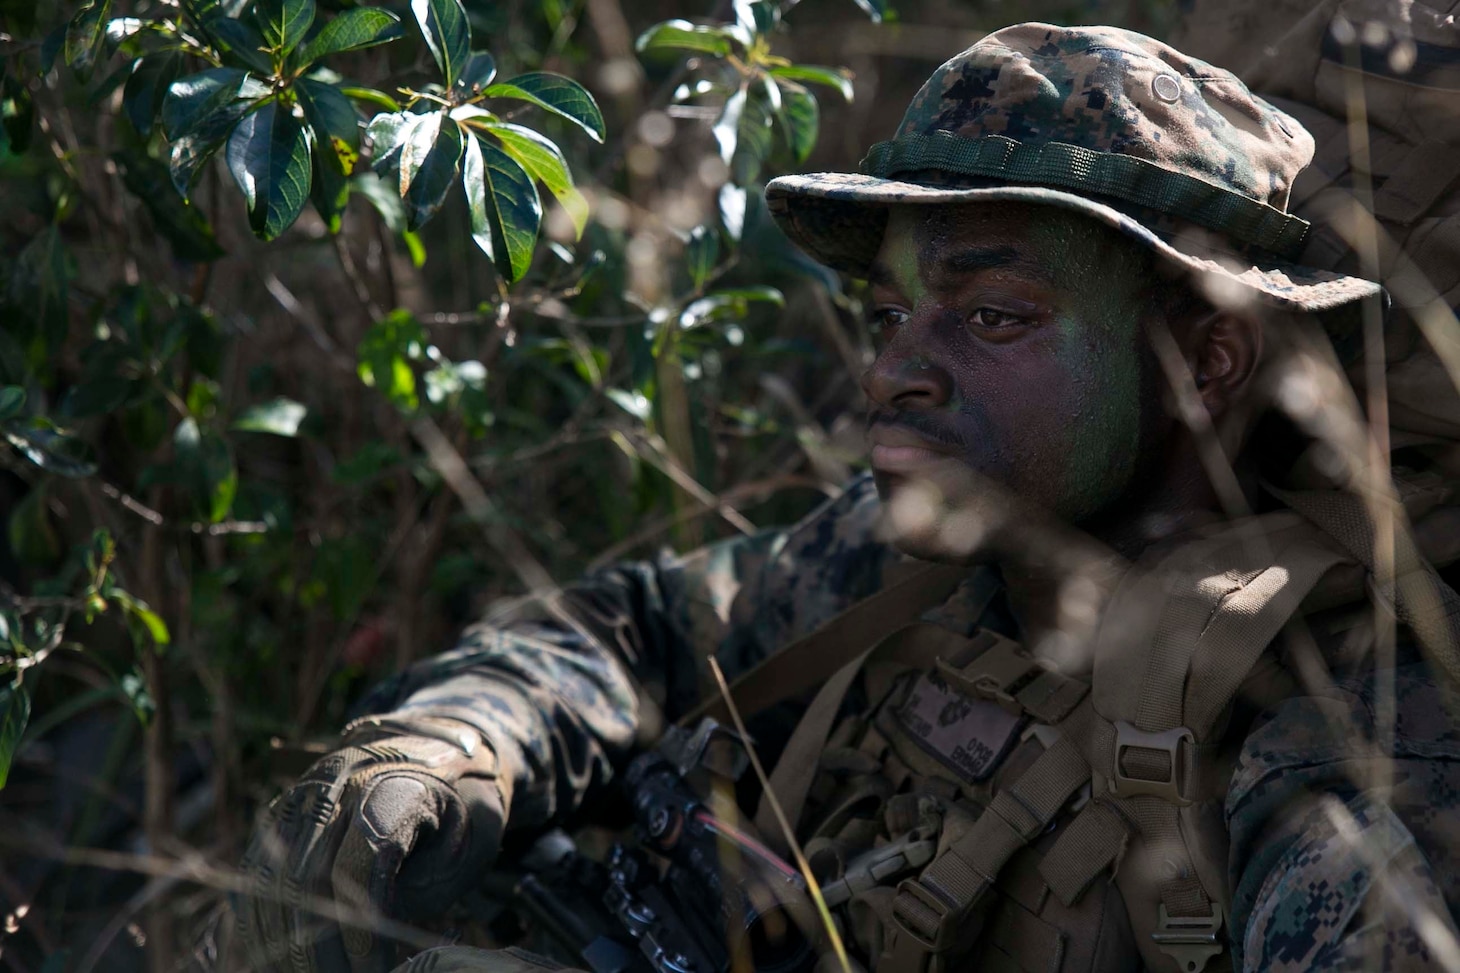 Lance Cpl. James E. Roberts III, a rifleman with 2nd Platoon, India Company, Battalion Landing Team, 3rd Battalion, 5th Marines, 31st Marine Expeditionary Unit, rests during a patrol through the Australia Defense Force’s Townshend Island Training Area, Queensland, Australia, during Exercise Talisman Saber 17, July 14, 2017. The company’s simulated mission included clearing and securing the training area. India Company is the mechanized raid company for the 31st MEU, currently supporting Talisman Saber 17 while deployed on its scheduled patrol of the Indo-Asia-Pacific region. Talisman Saber is a biennial exercise designed to improve the interoperability between Australian and U.S. forces. (U.S. Marine Corps photo by Cpl. Amaia Unanue/ Released)